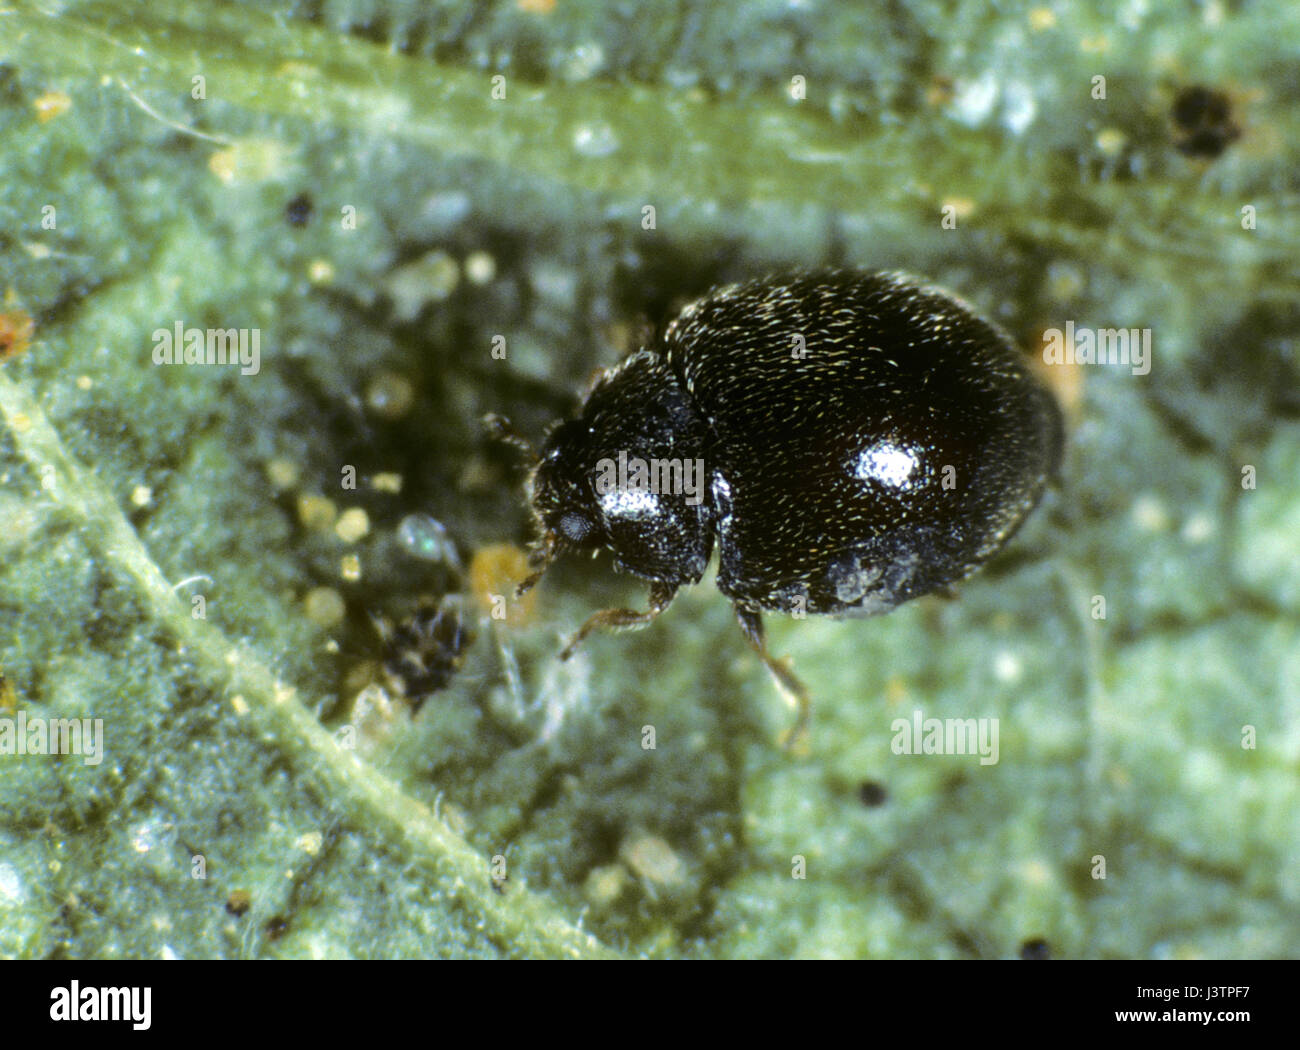 Minute black ladybird, Stethorus punctillium, a small biological control insect preying on two-spotted spider mites Stock Photo